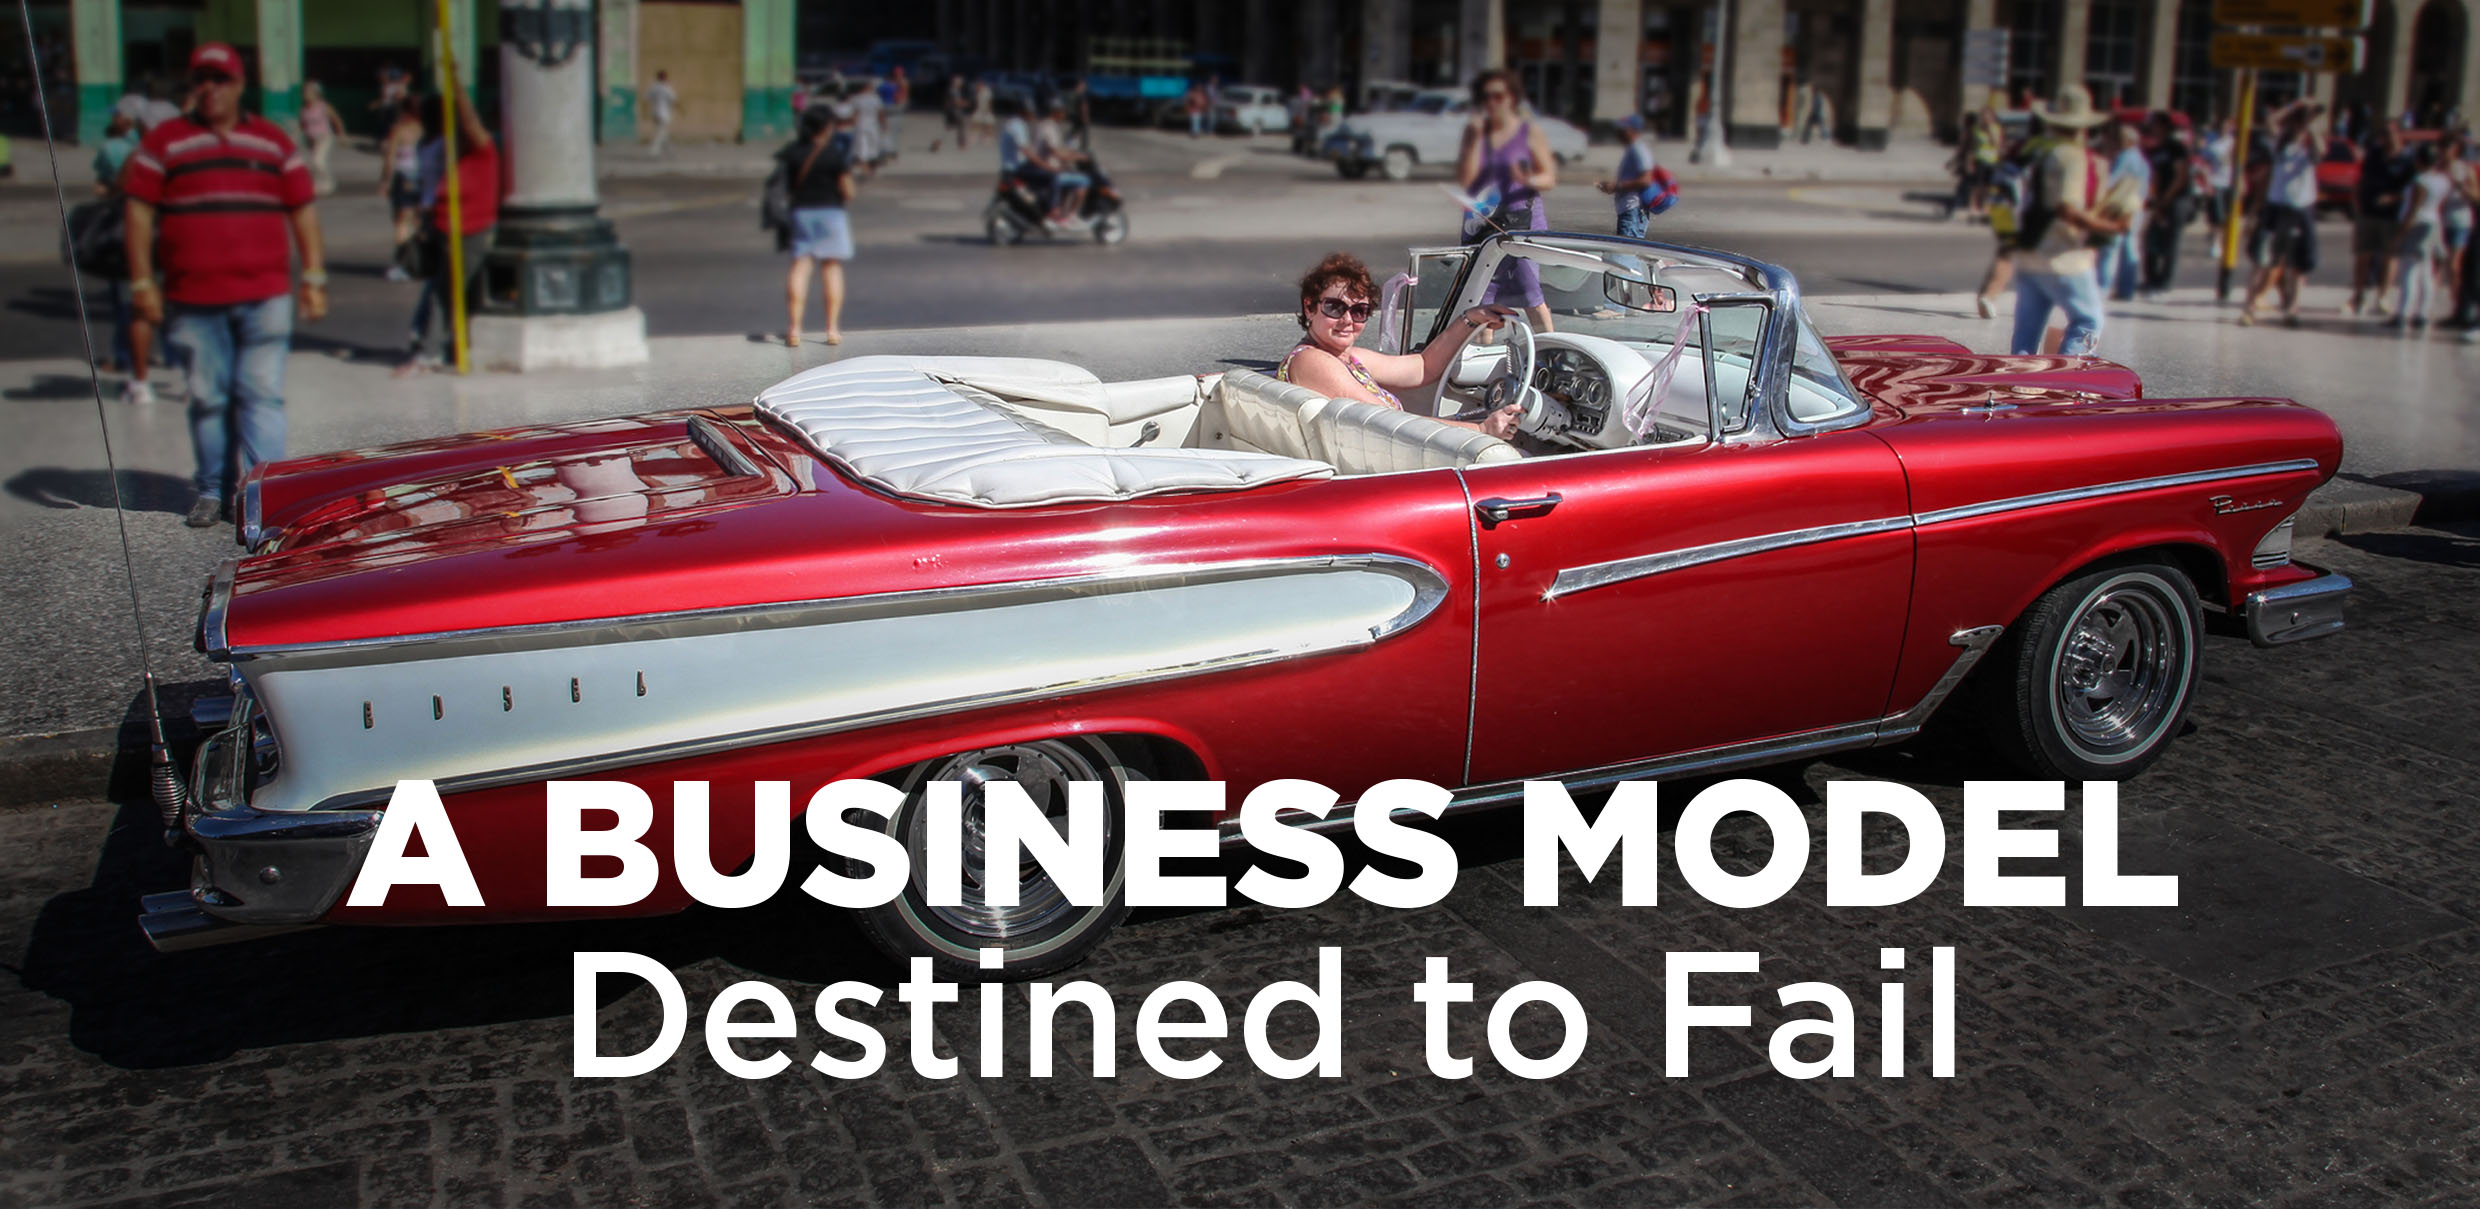 You are currently viewing A Business Model Destined to Fail